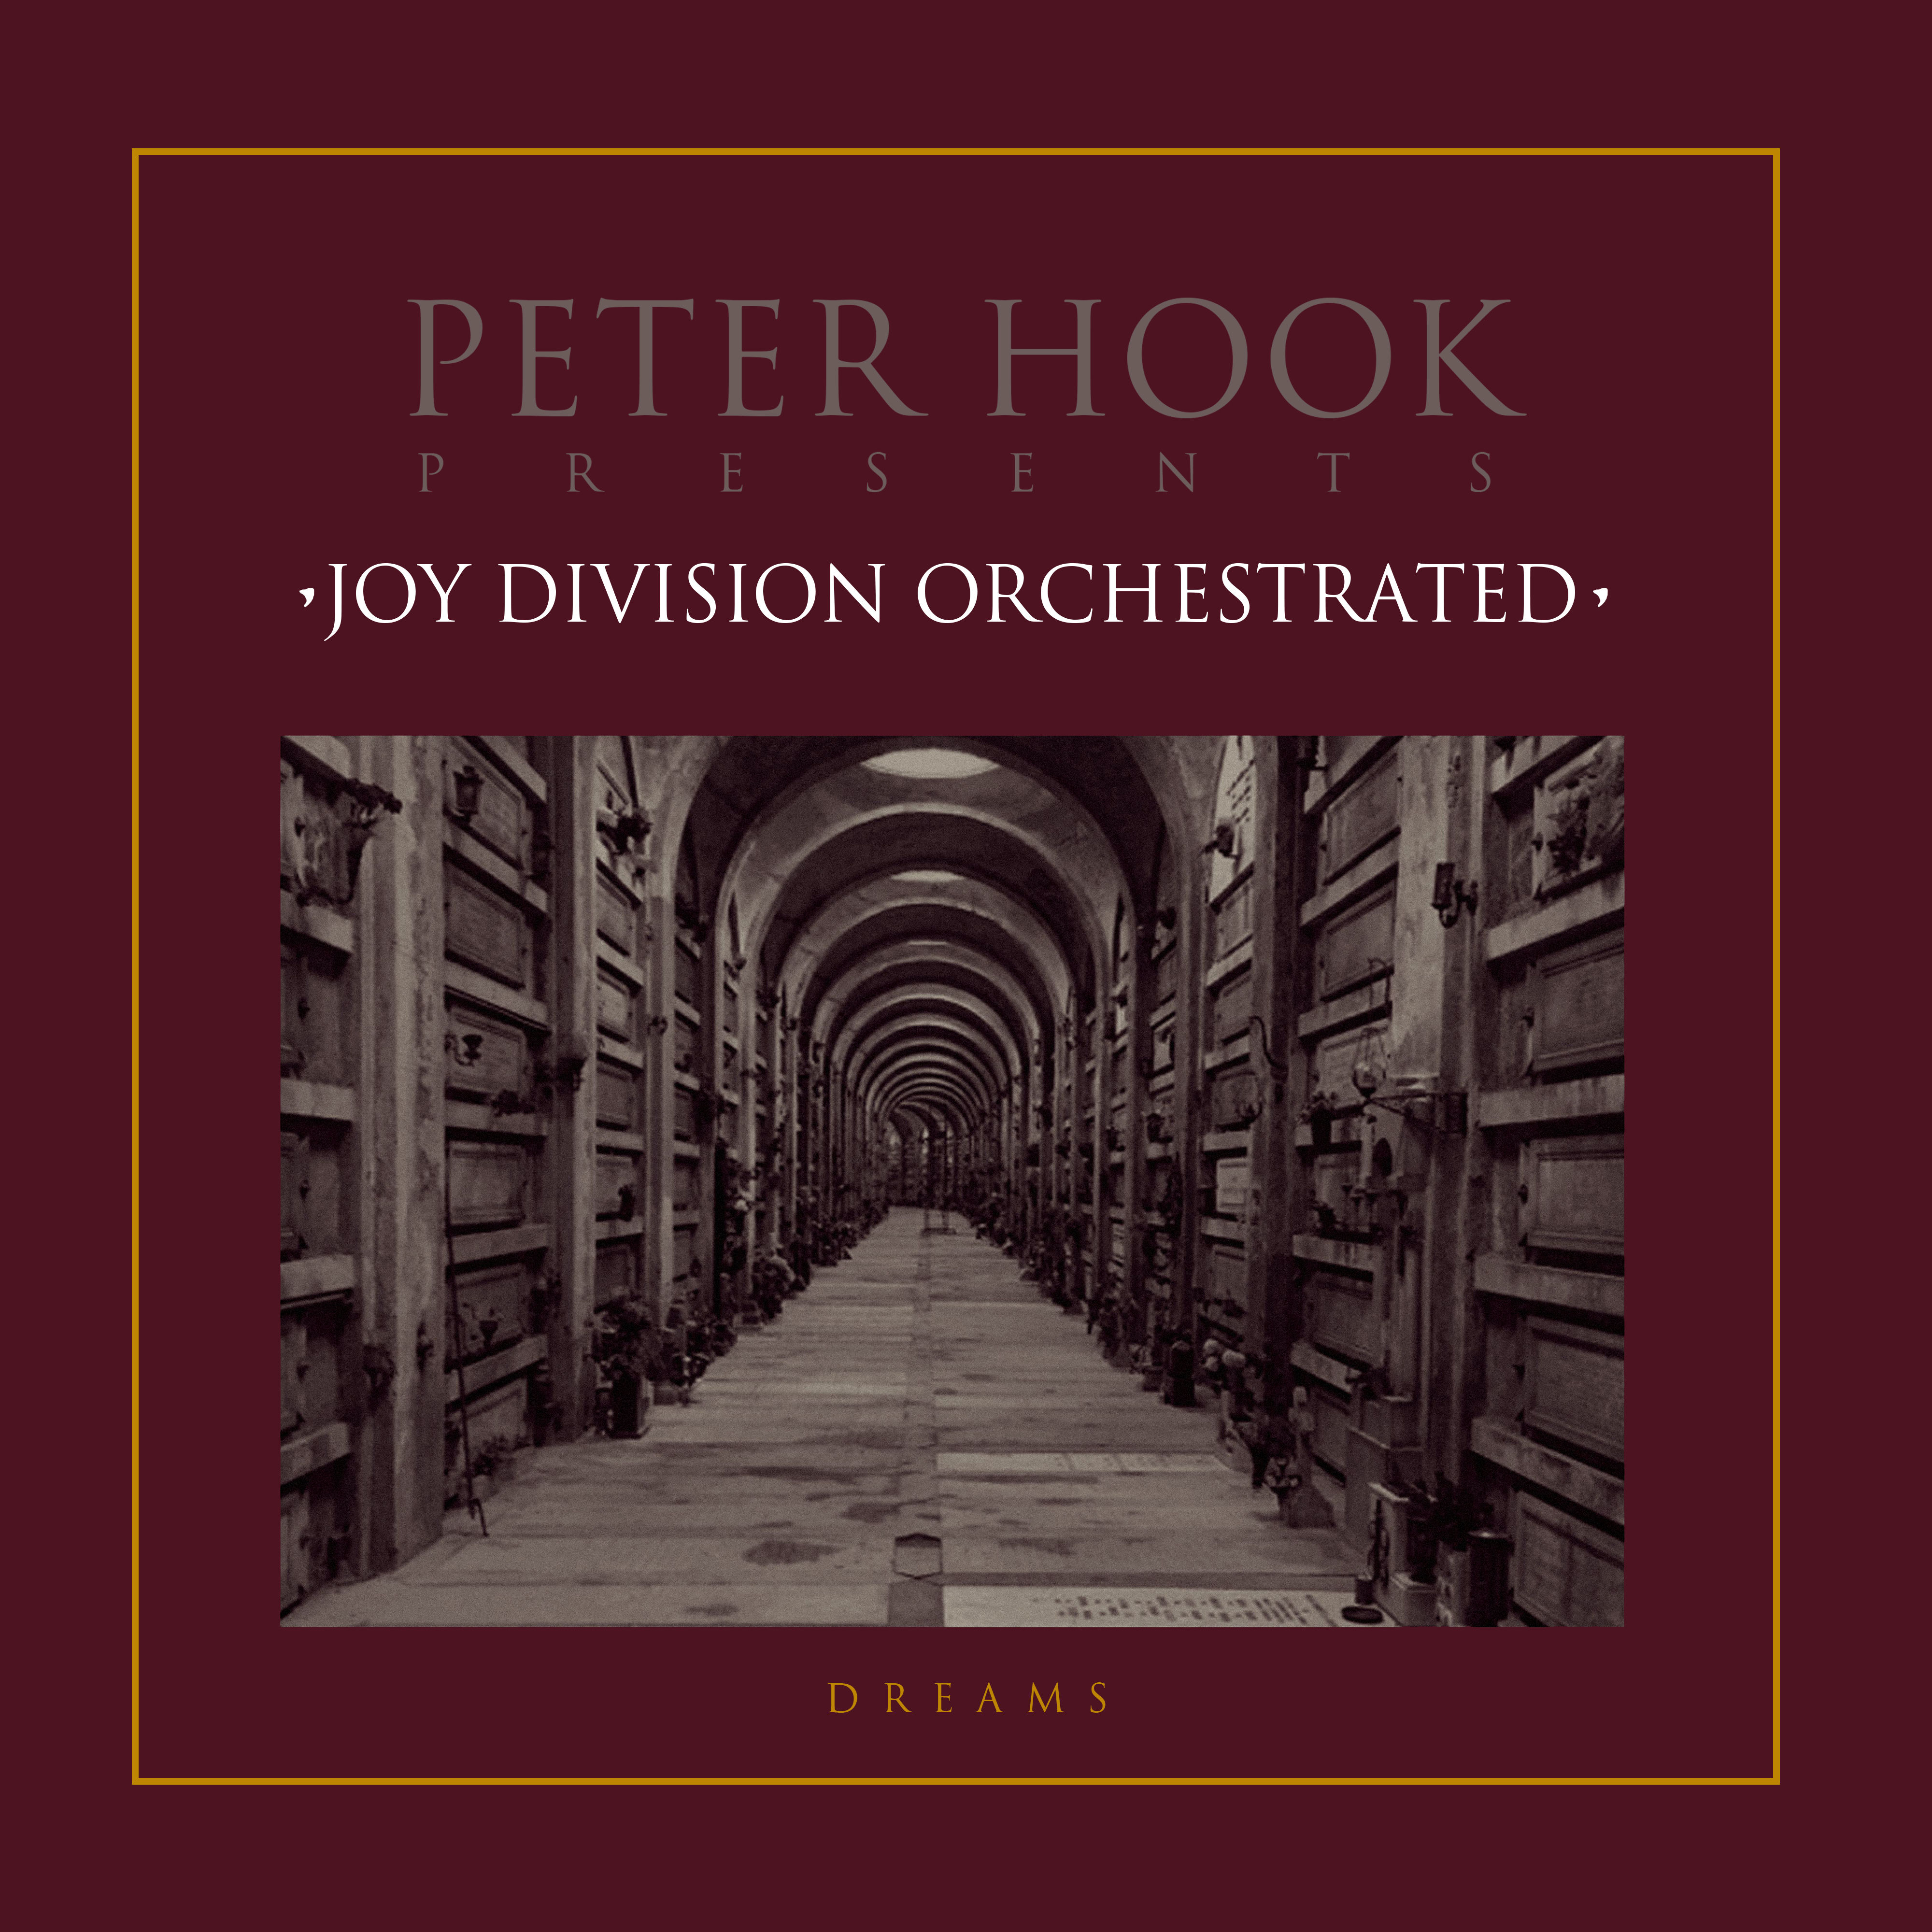 Peter Hook – Peter Hook Presents Dreams EP (Joy Division Orchestrated) (2021) [FLAC 24bit/44,1kHz]